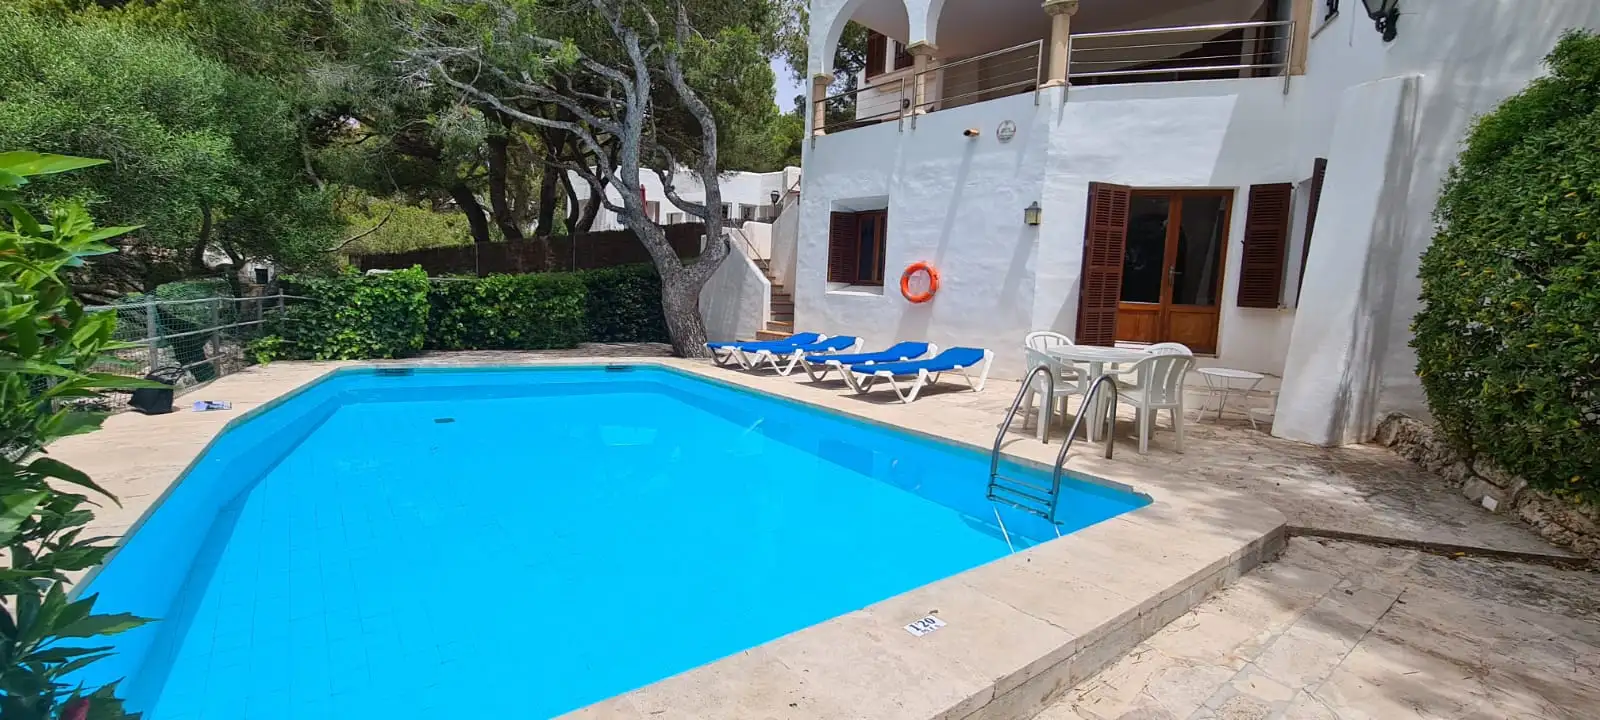 SOLD Front line villa with own access to the sea in Cala d Or, Mallorca 